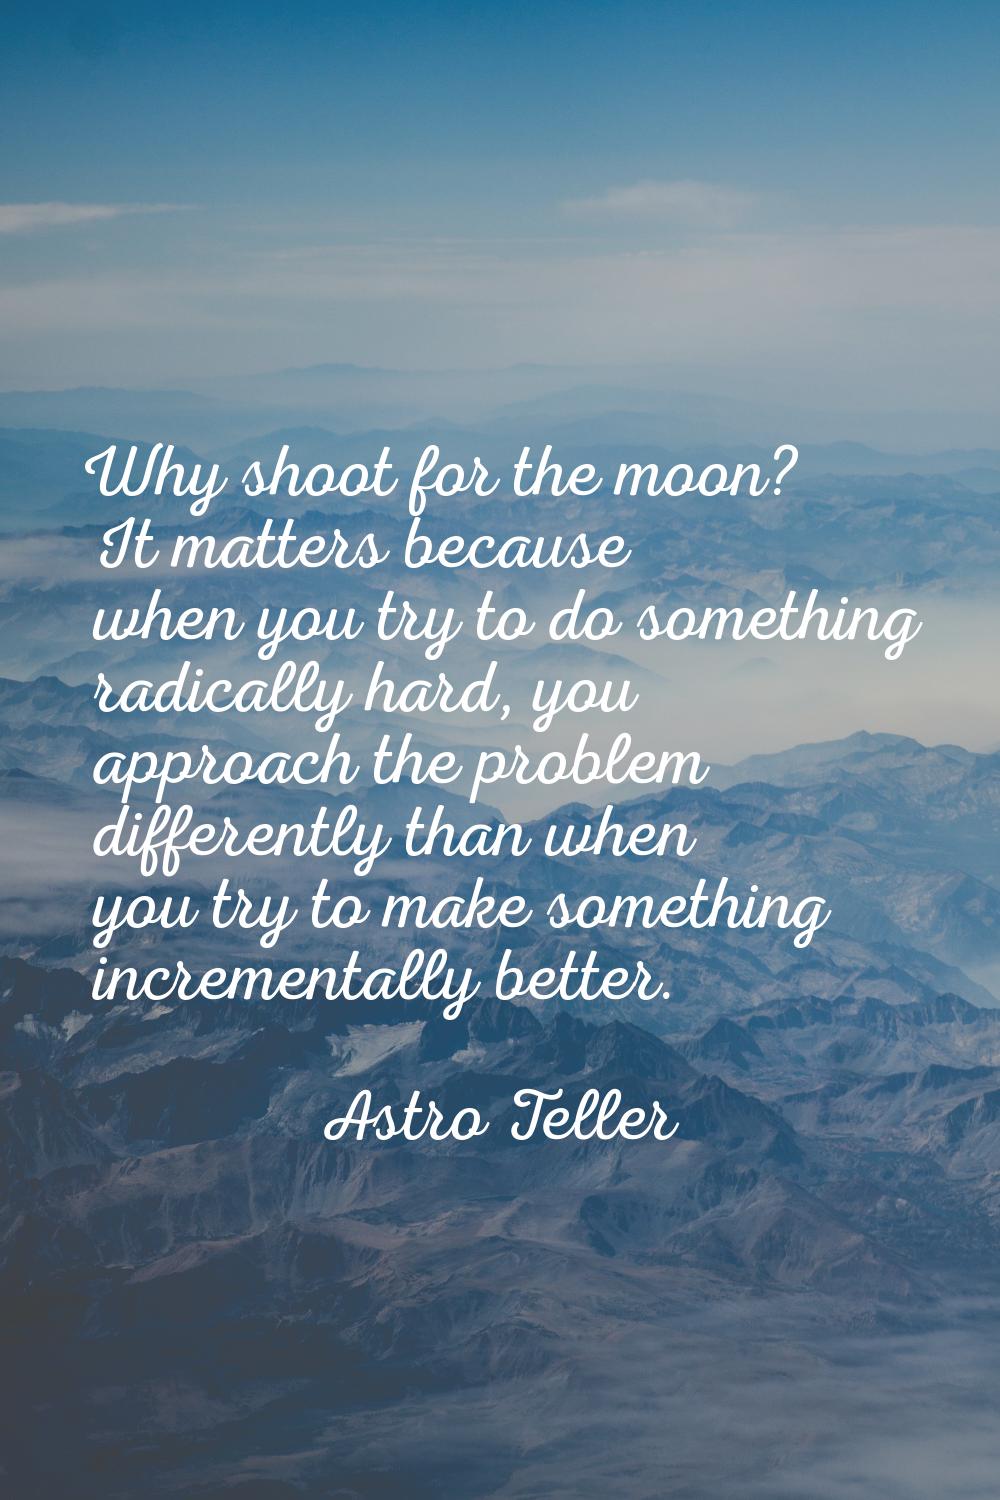 Why shoot for the moon? It matters because when you try to do something radically hard, you approac